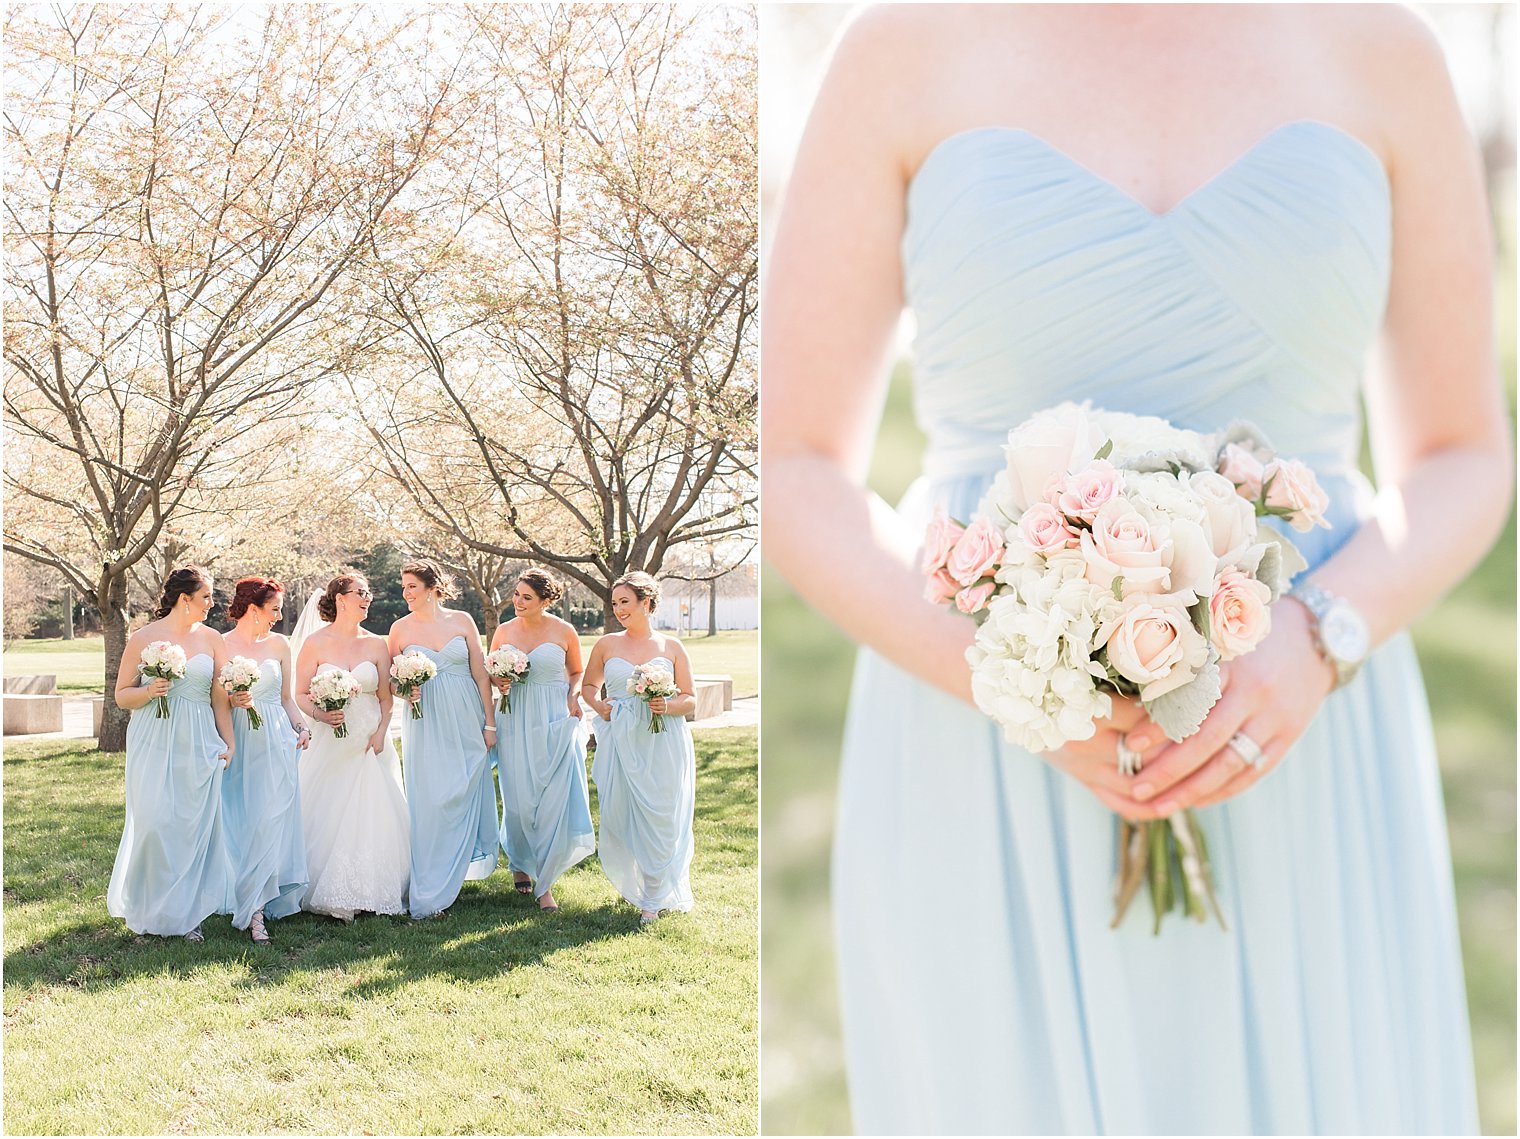 Bridesmaids in pale blue dresses | Photo by Idalia Photography